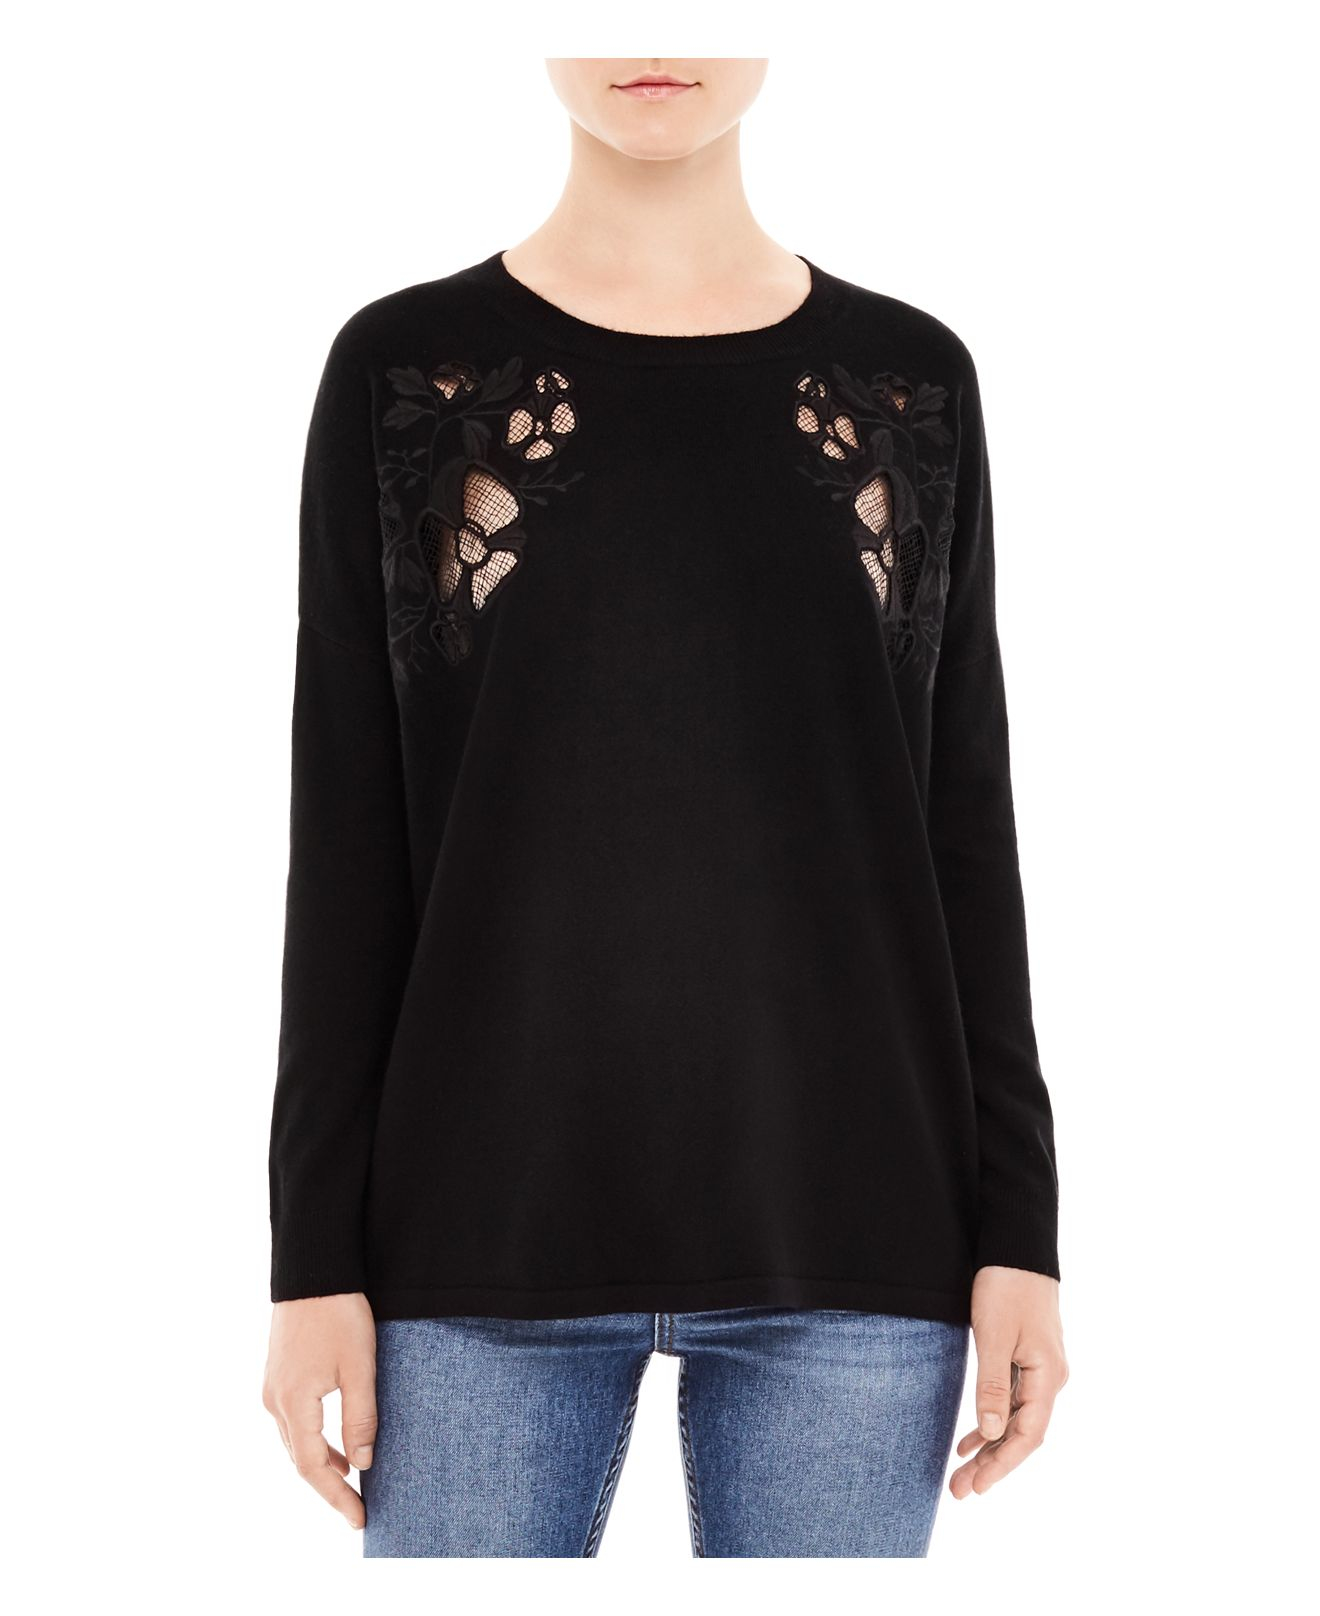 Sandro Wool Benny Lace-inset Sweater in Black - Lyst